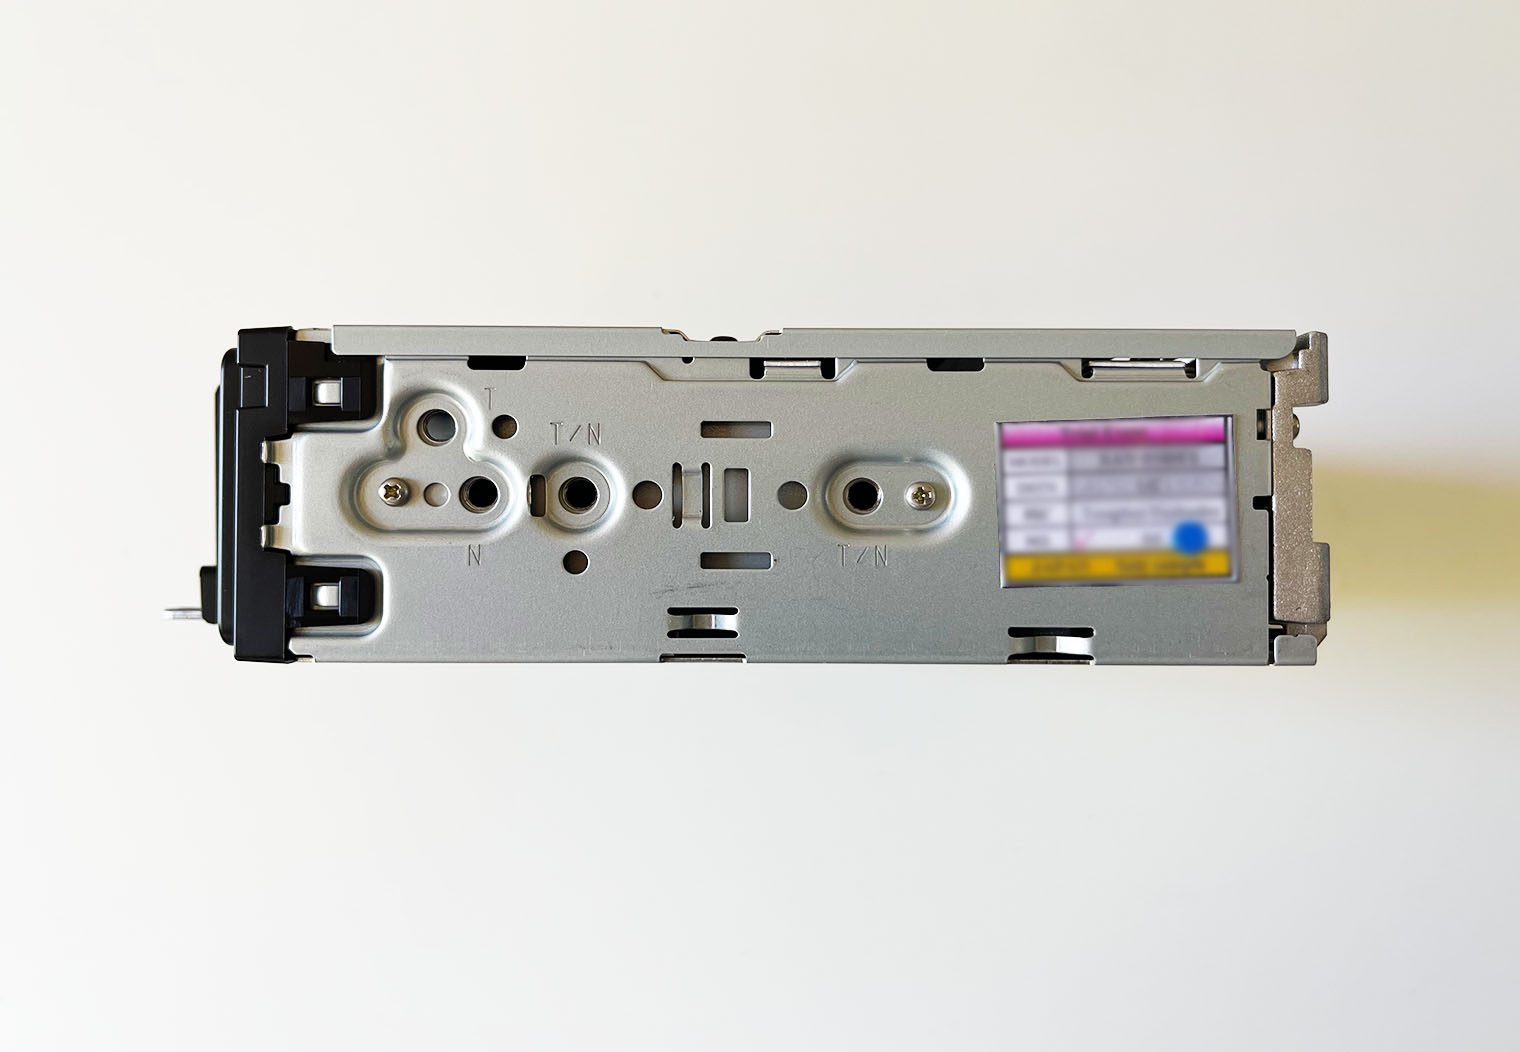 Side view of the Sony XAV-9500ES single din chassis with the screw holes